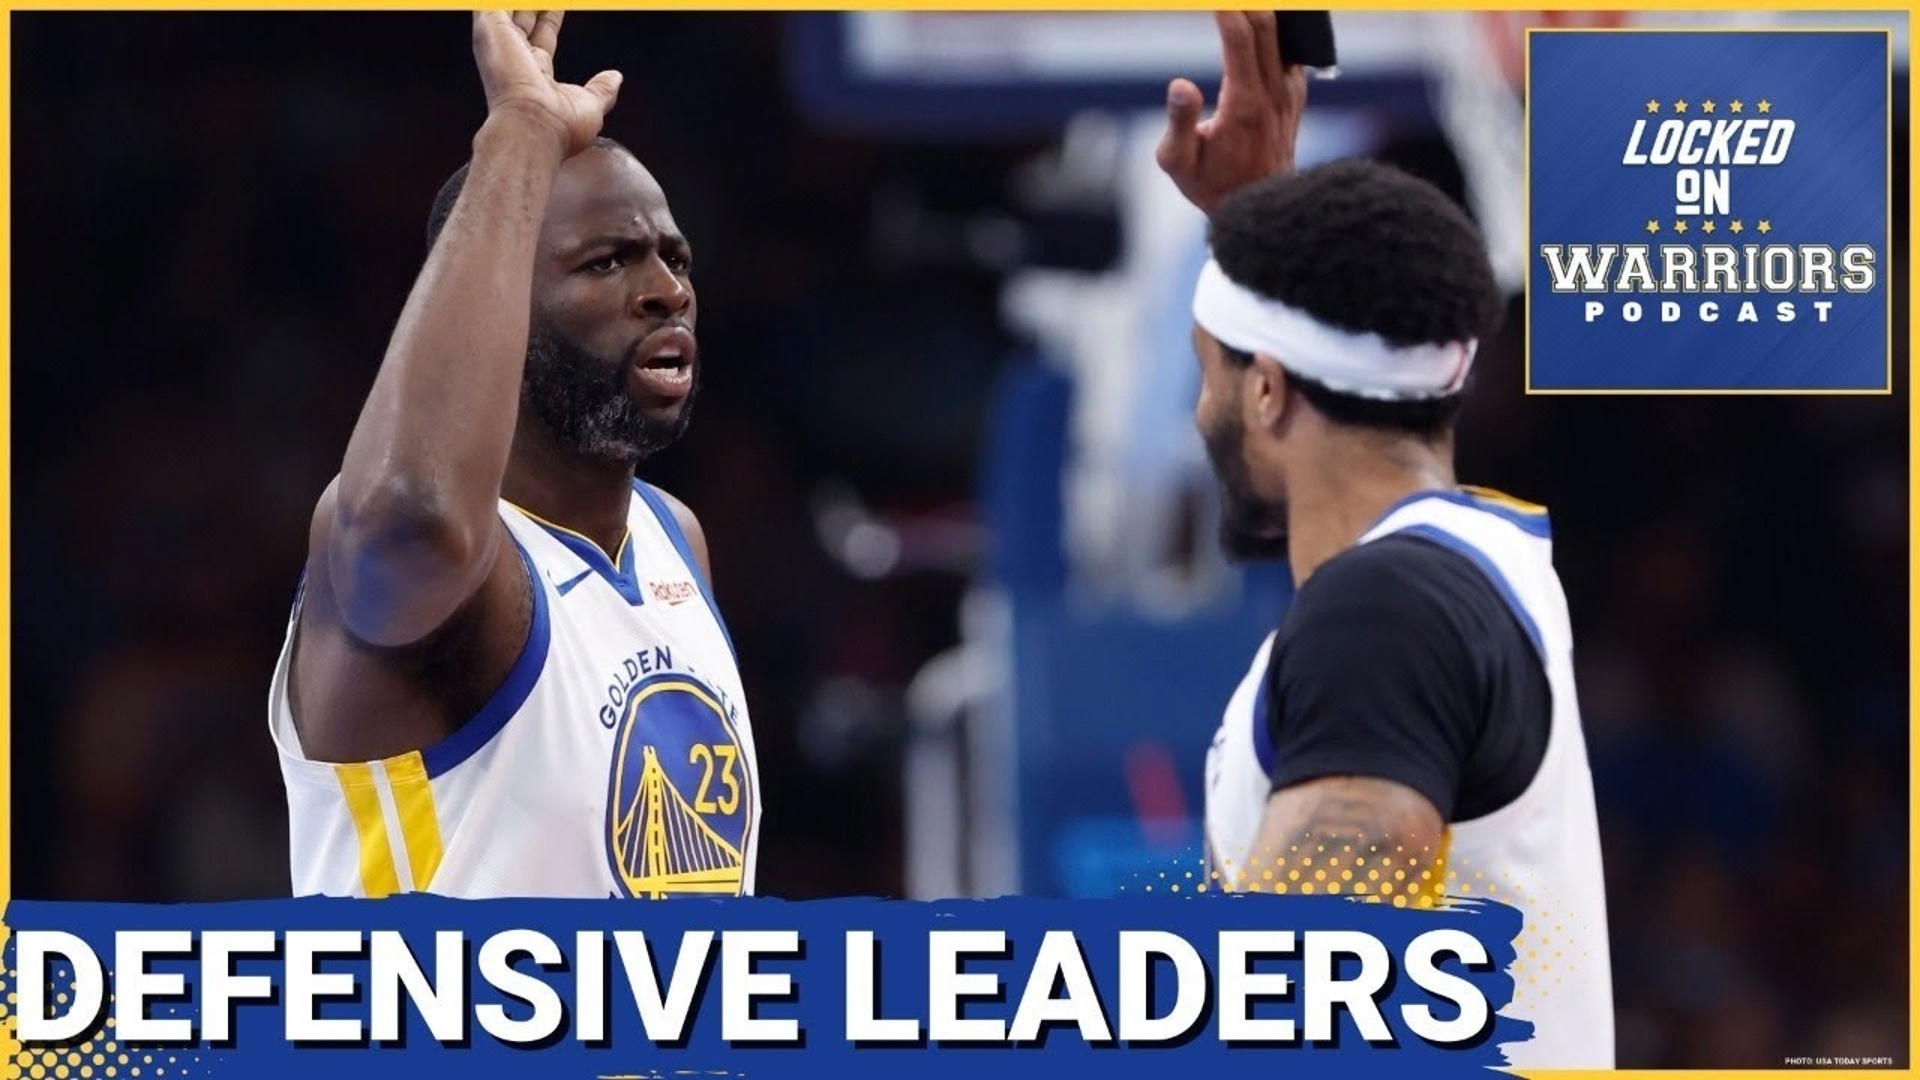 Cyrus Saatsaz revealed who the leaders were on the Golden State Warriors roster based on defensive matchup statistics.